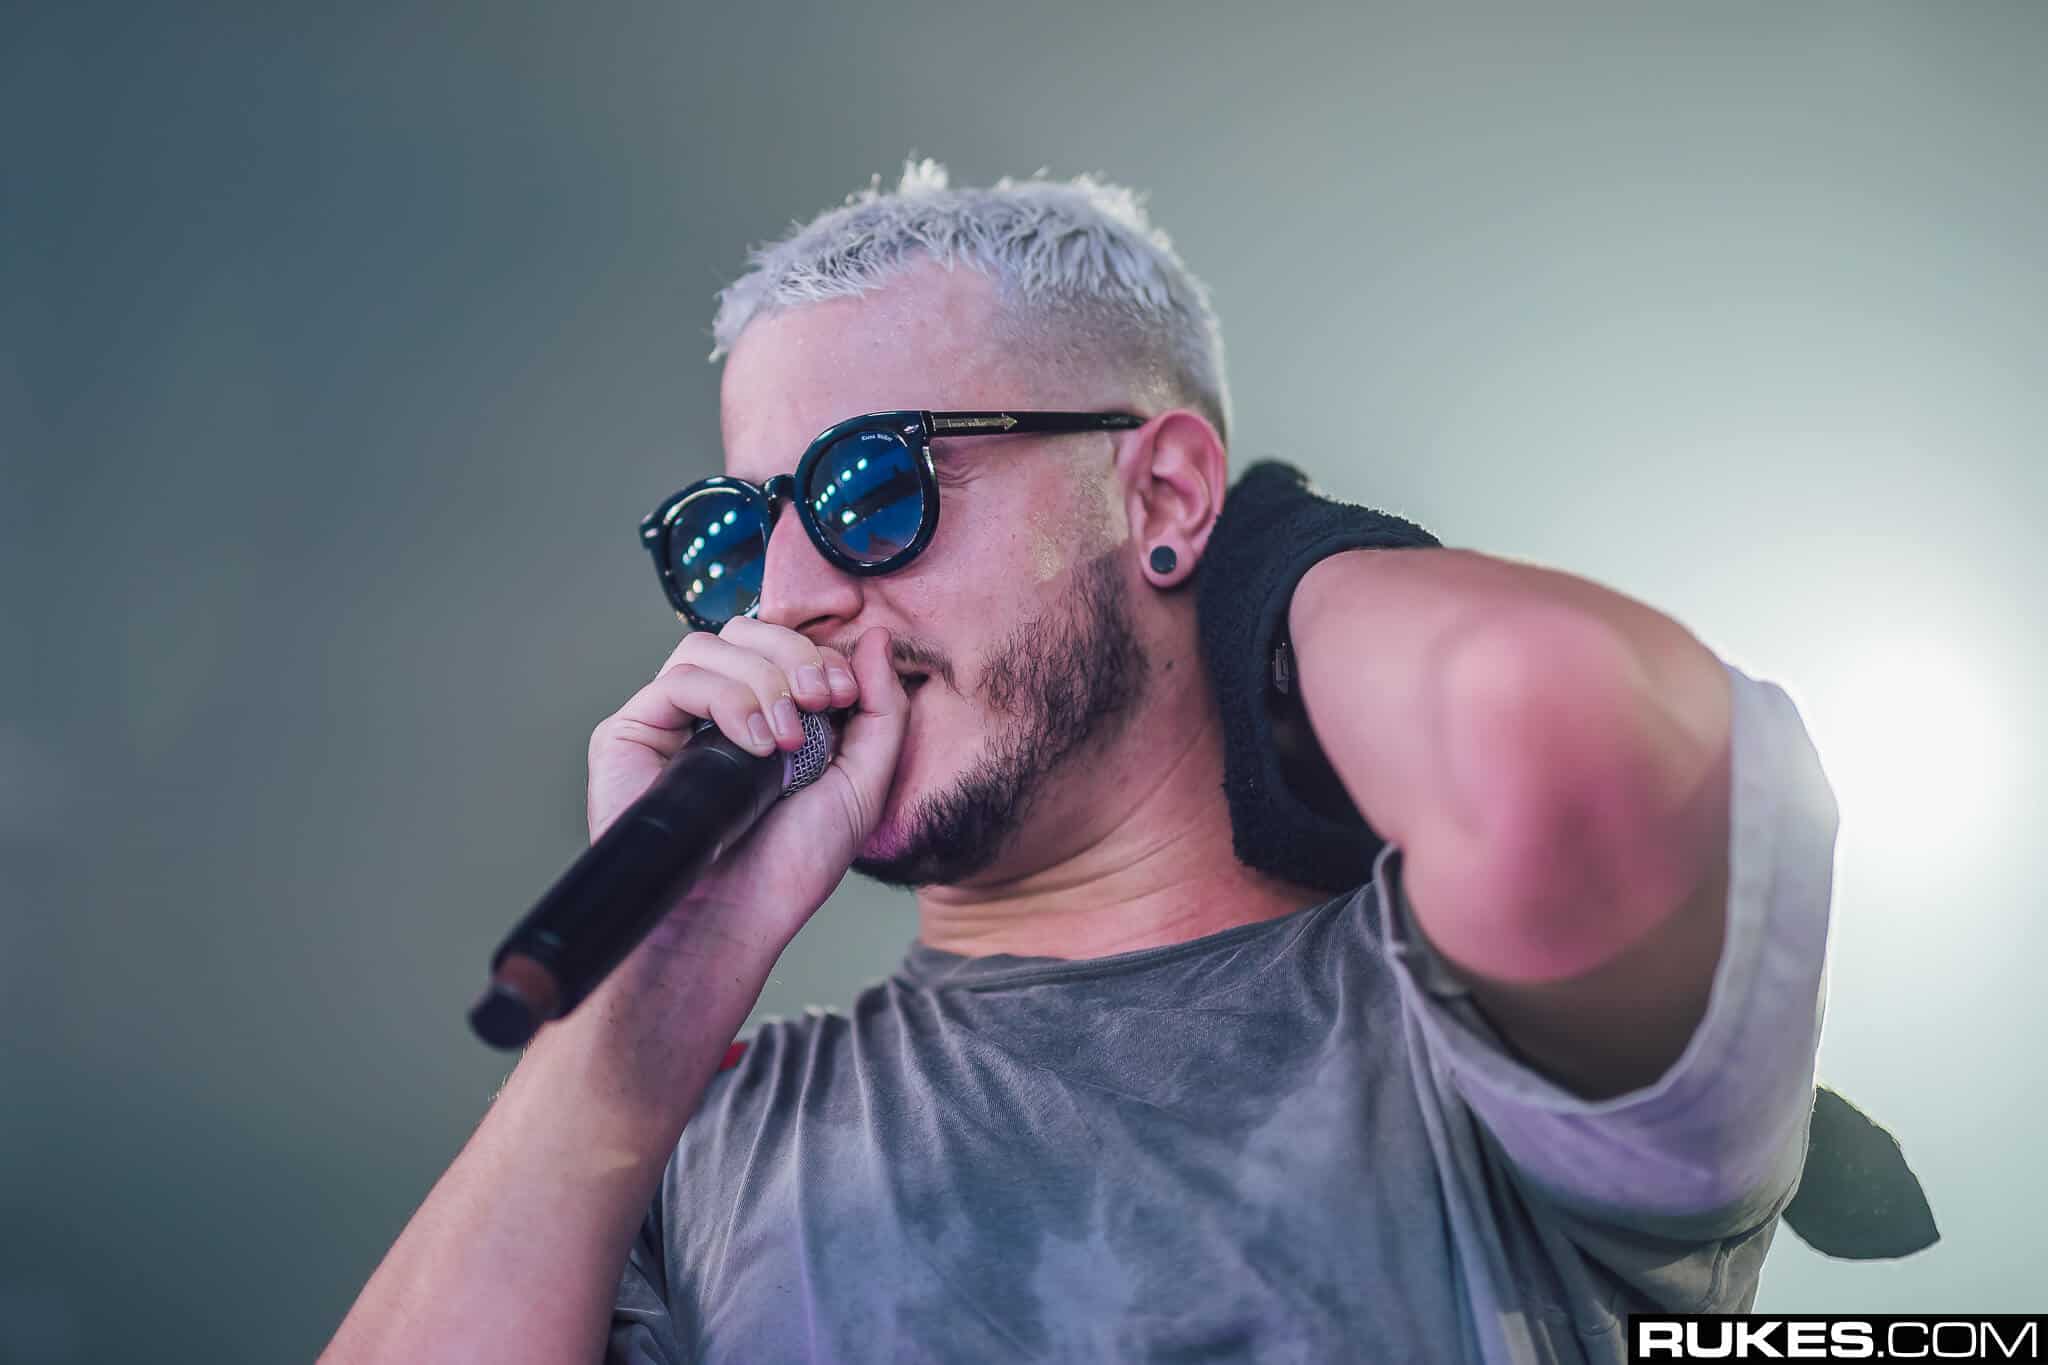 McDonald's France partners with DJ Snake for his own meal